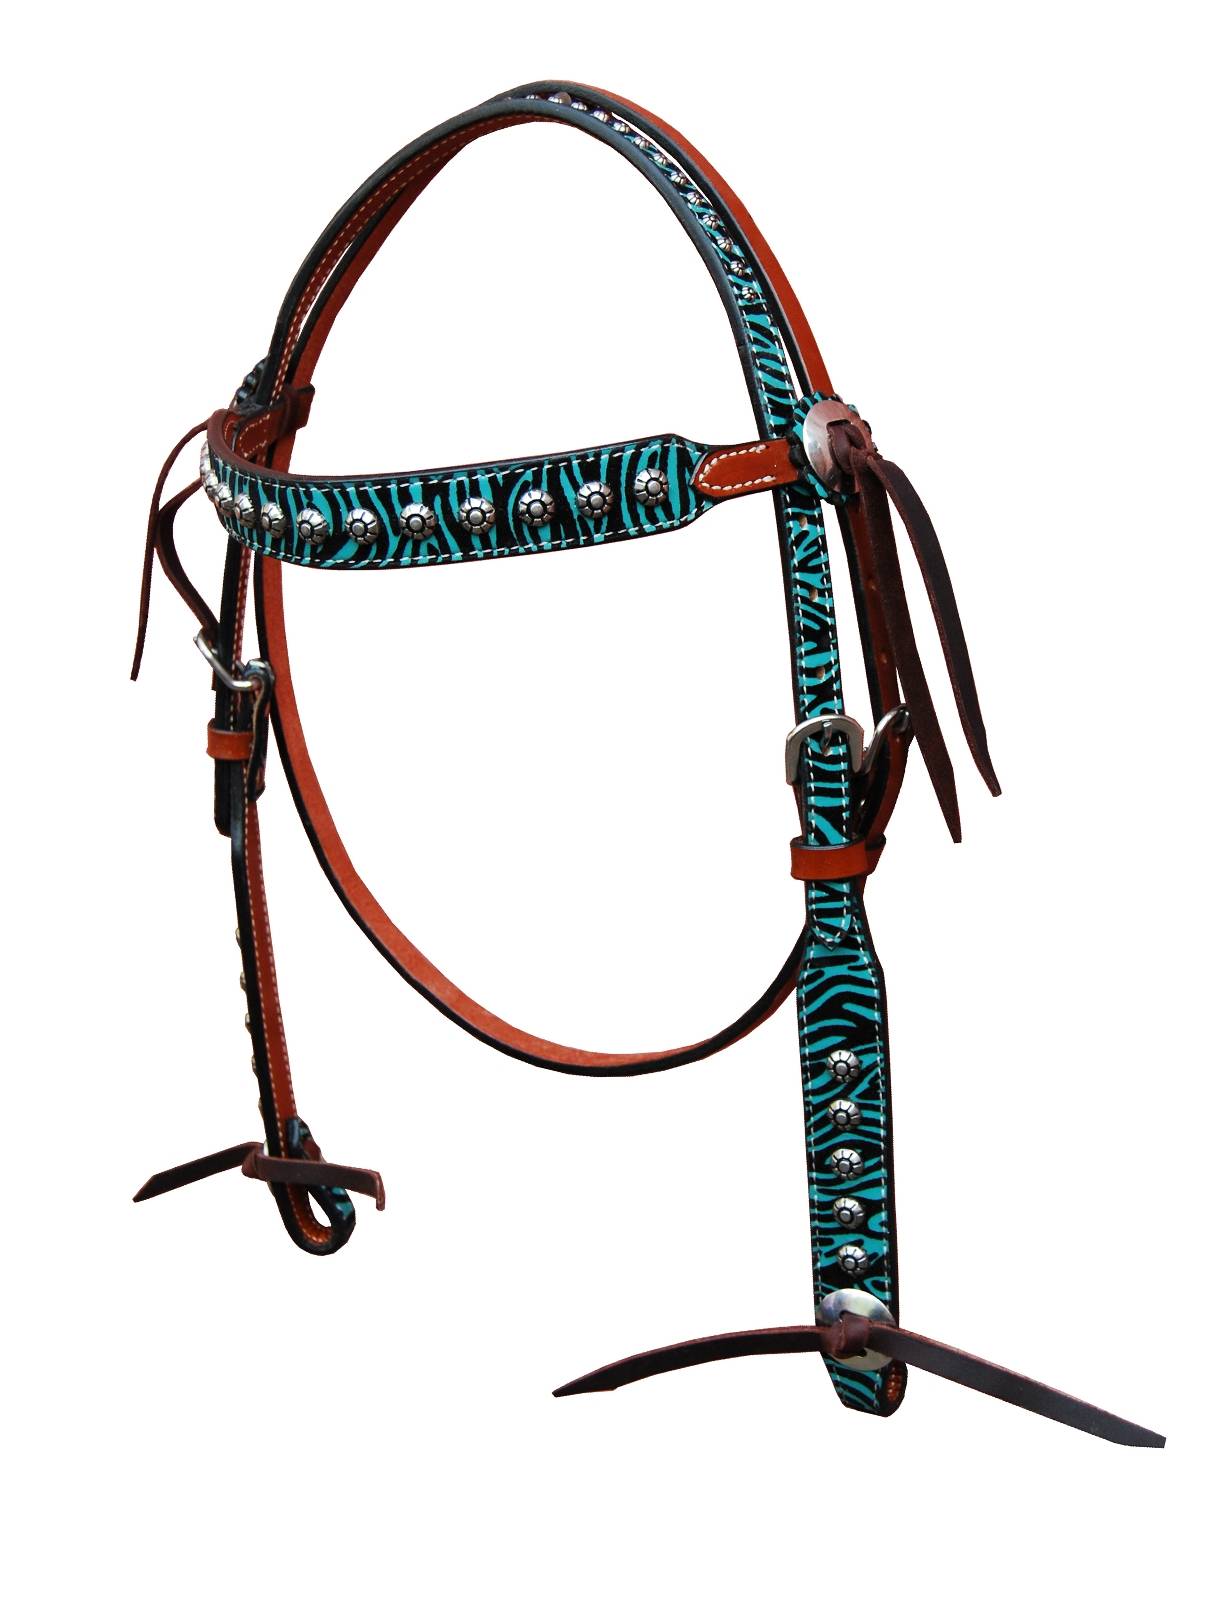 Turn-Two Browband Headstall - Chasing Wild